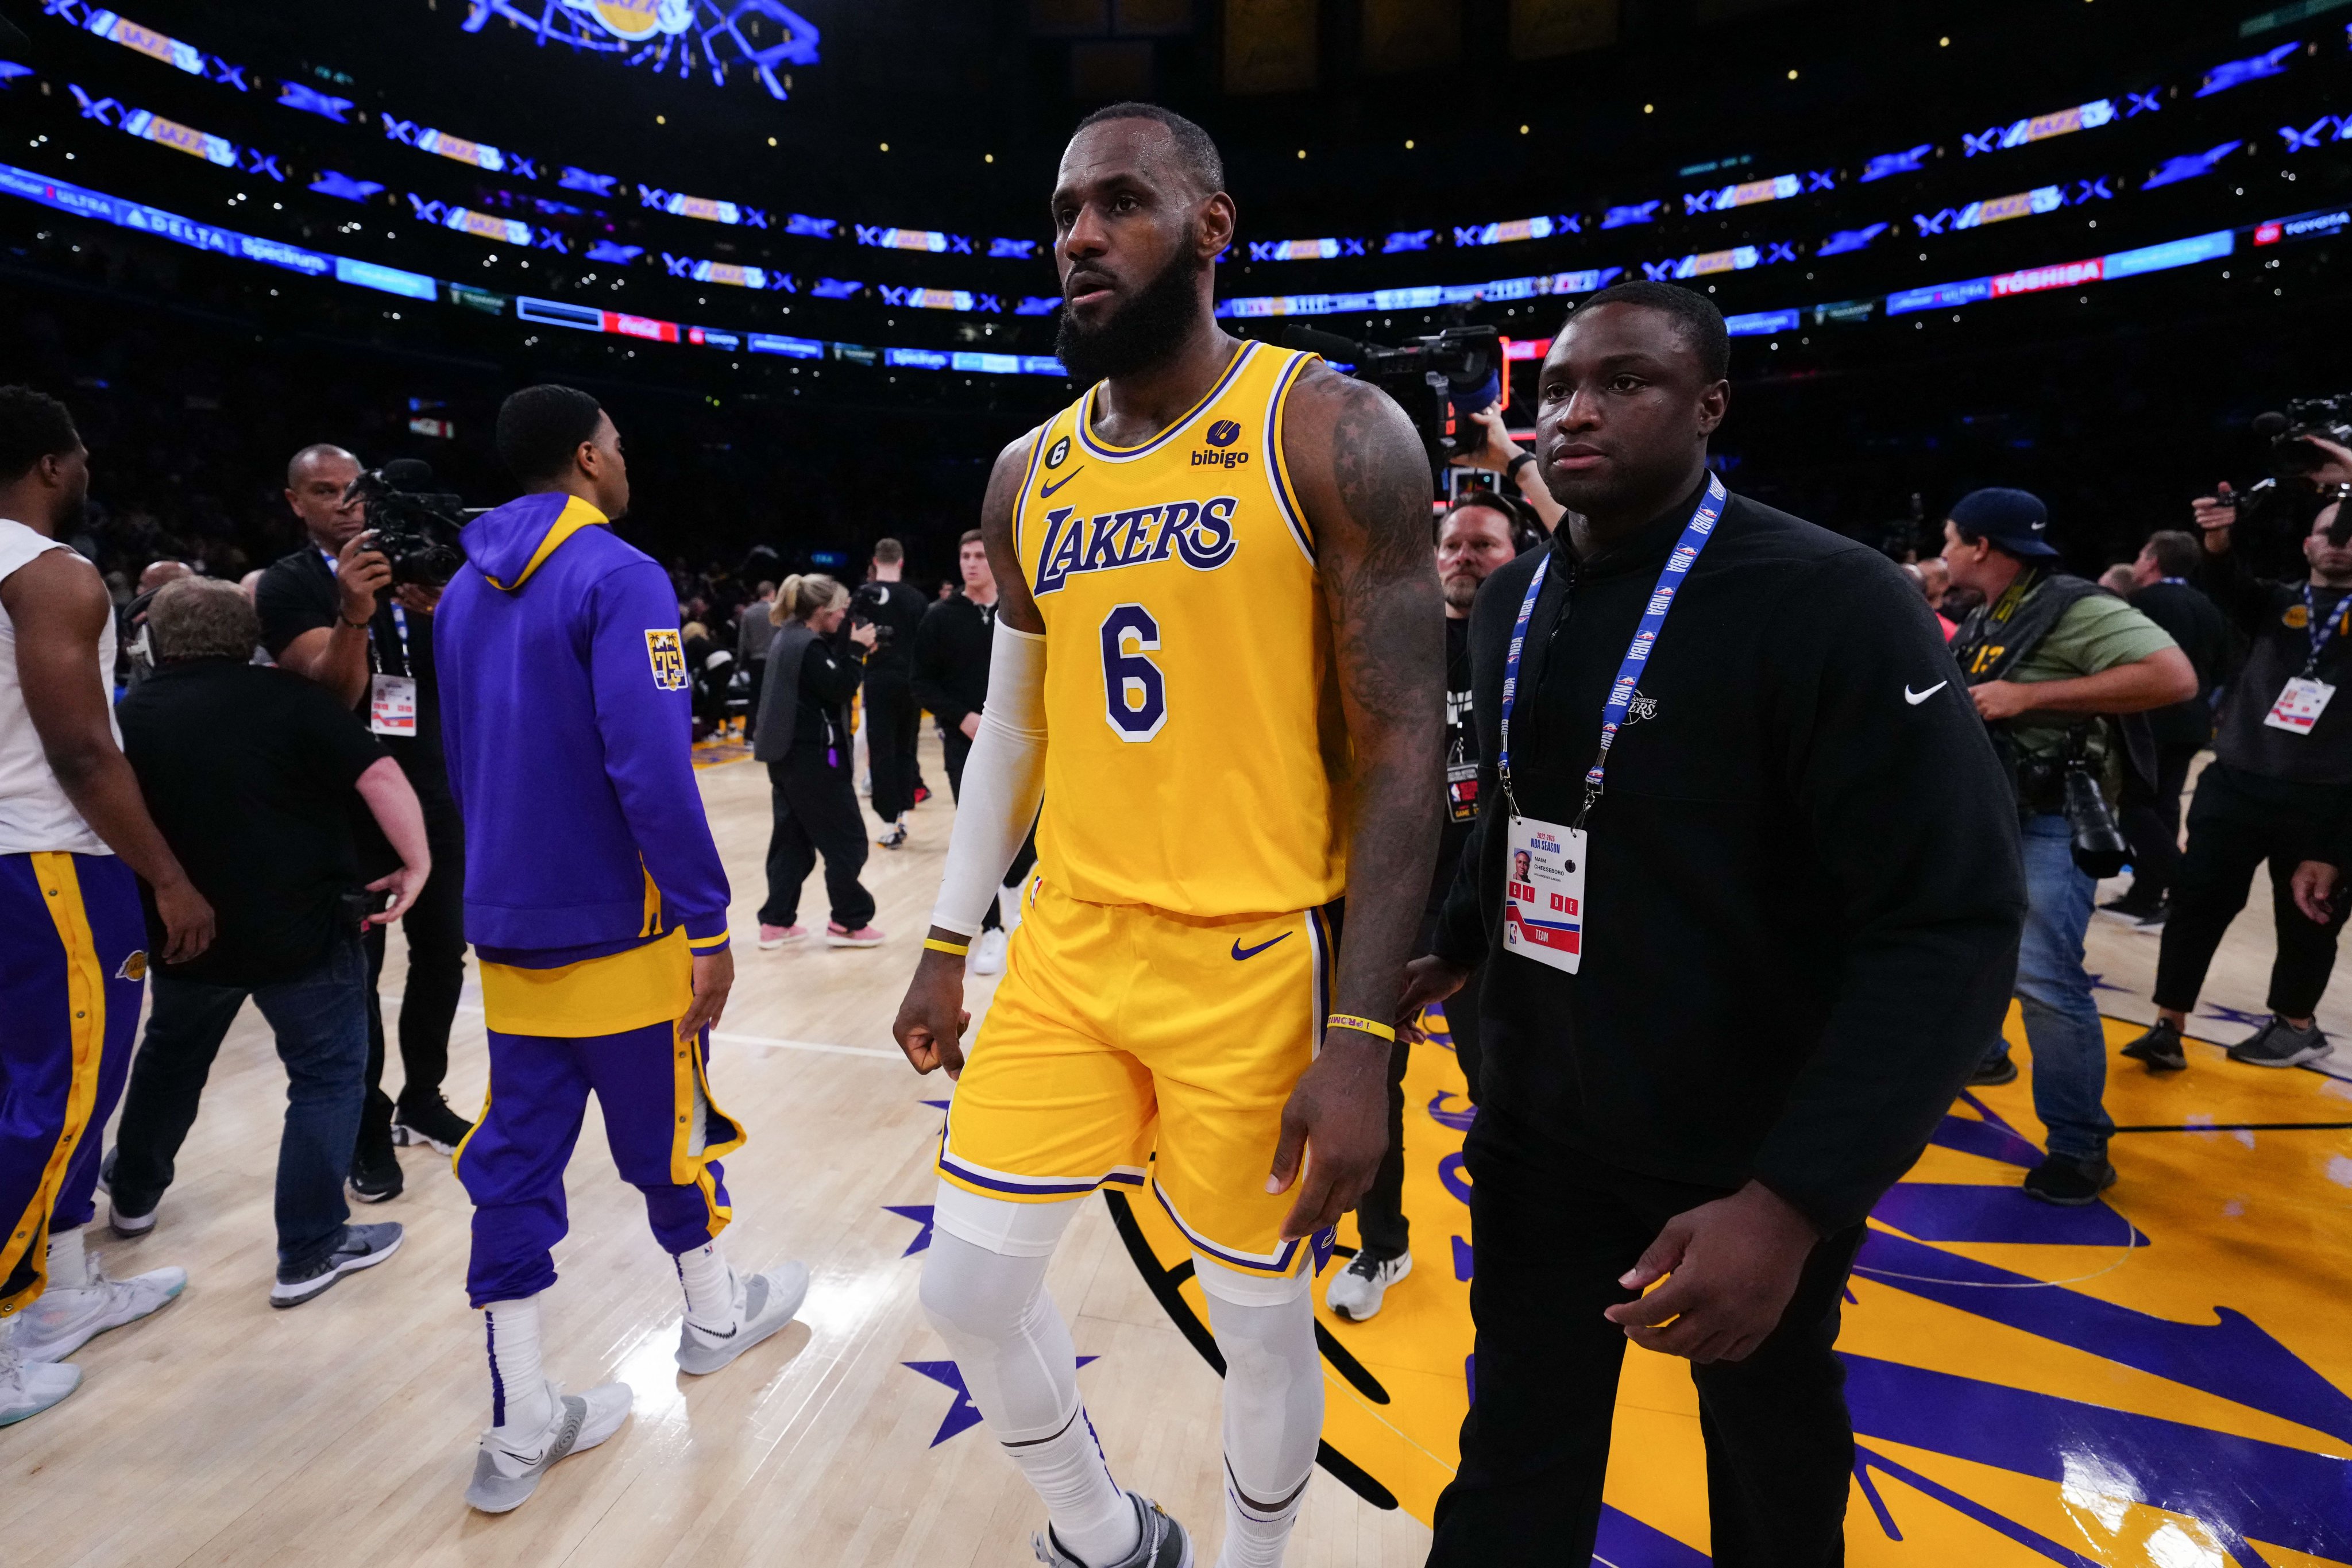 Lakers forward LeBron James reacts to losing to the Denver Nuggets in game 4 of the Western Conference Finals. Photo: USA TODAY Sports